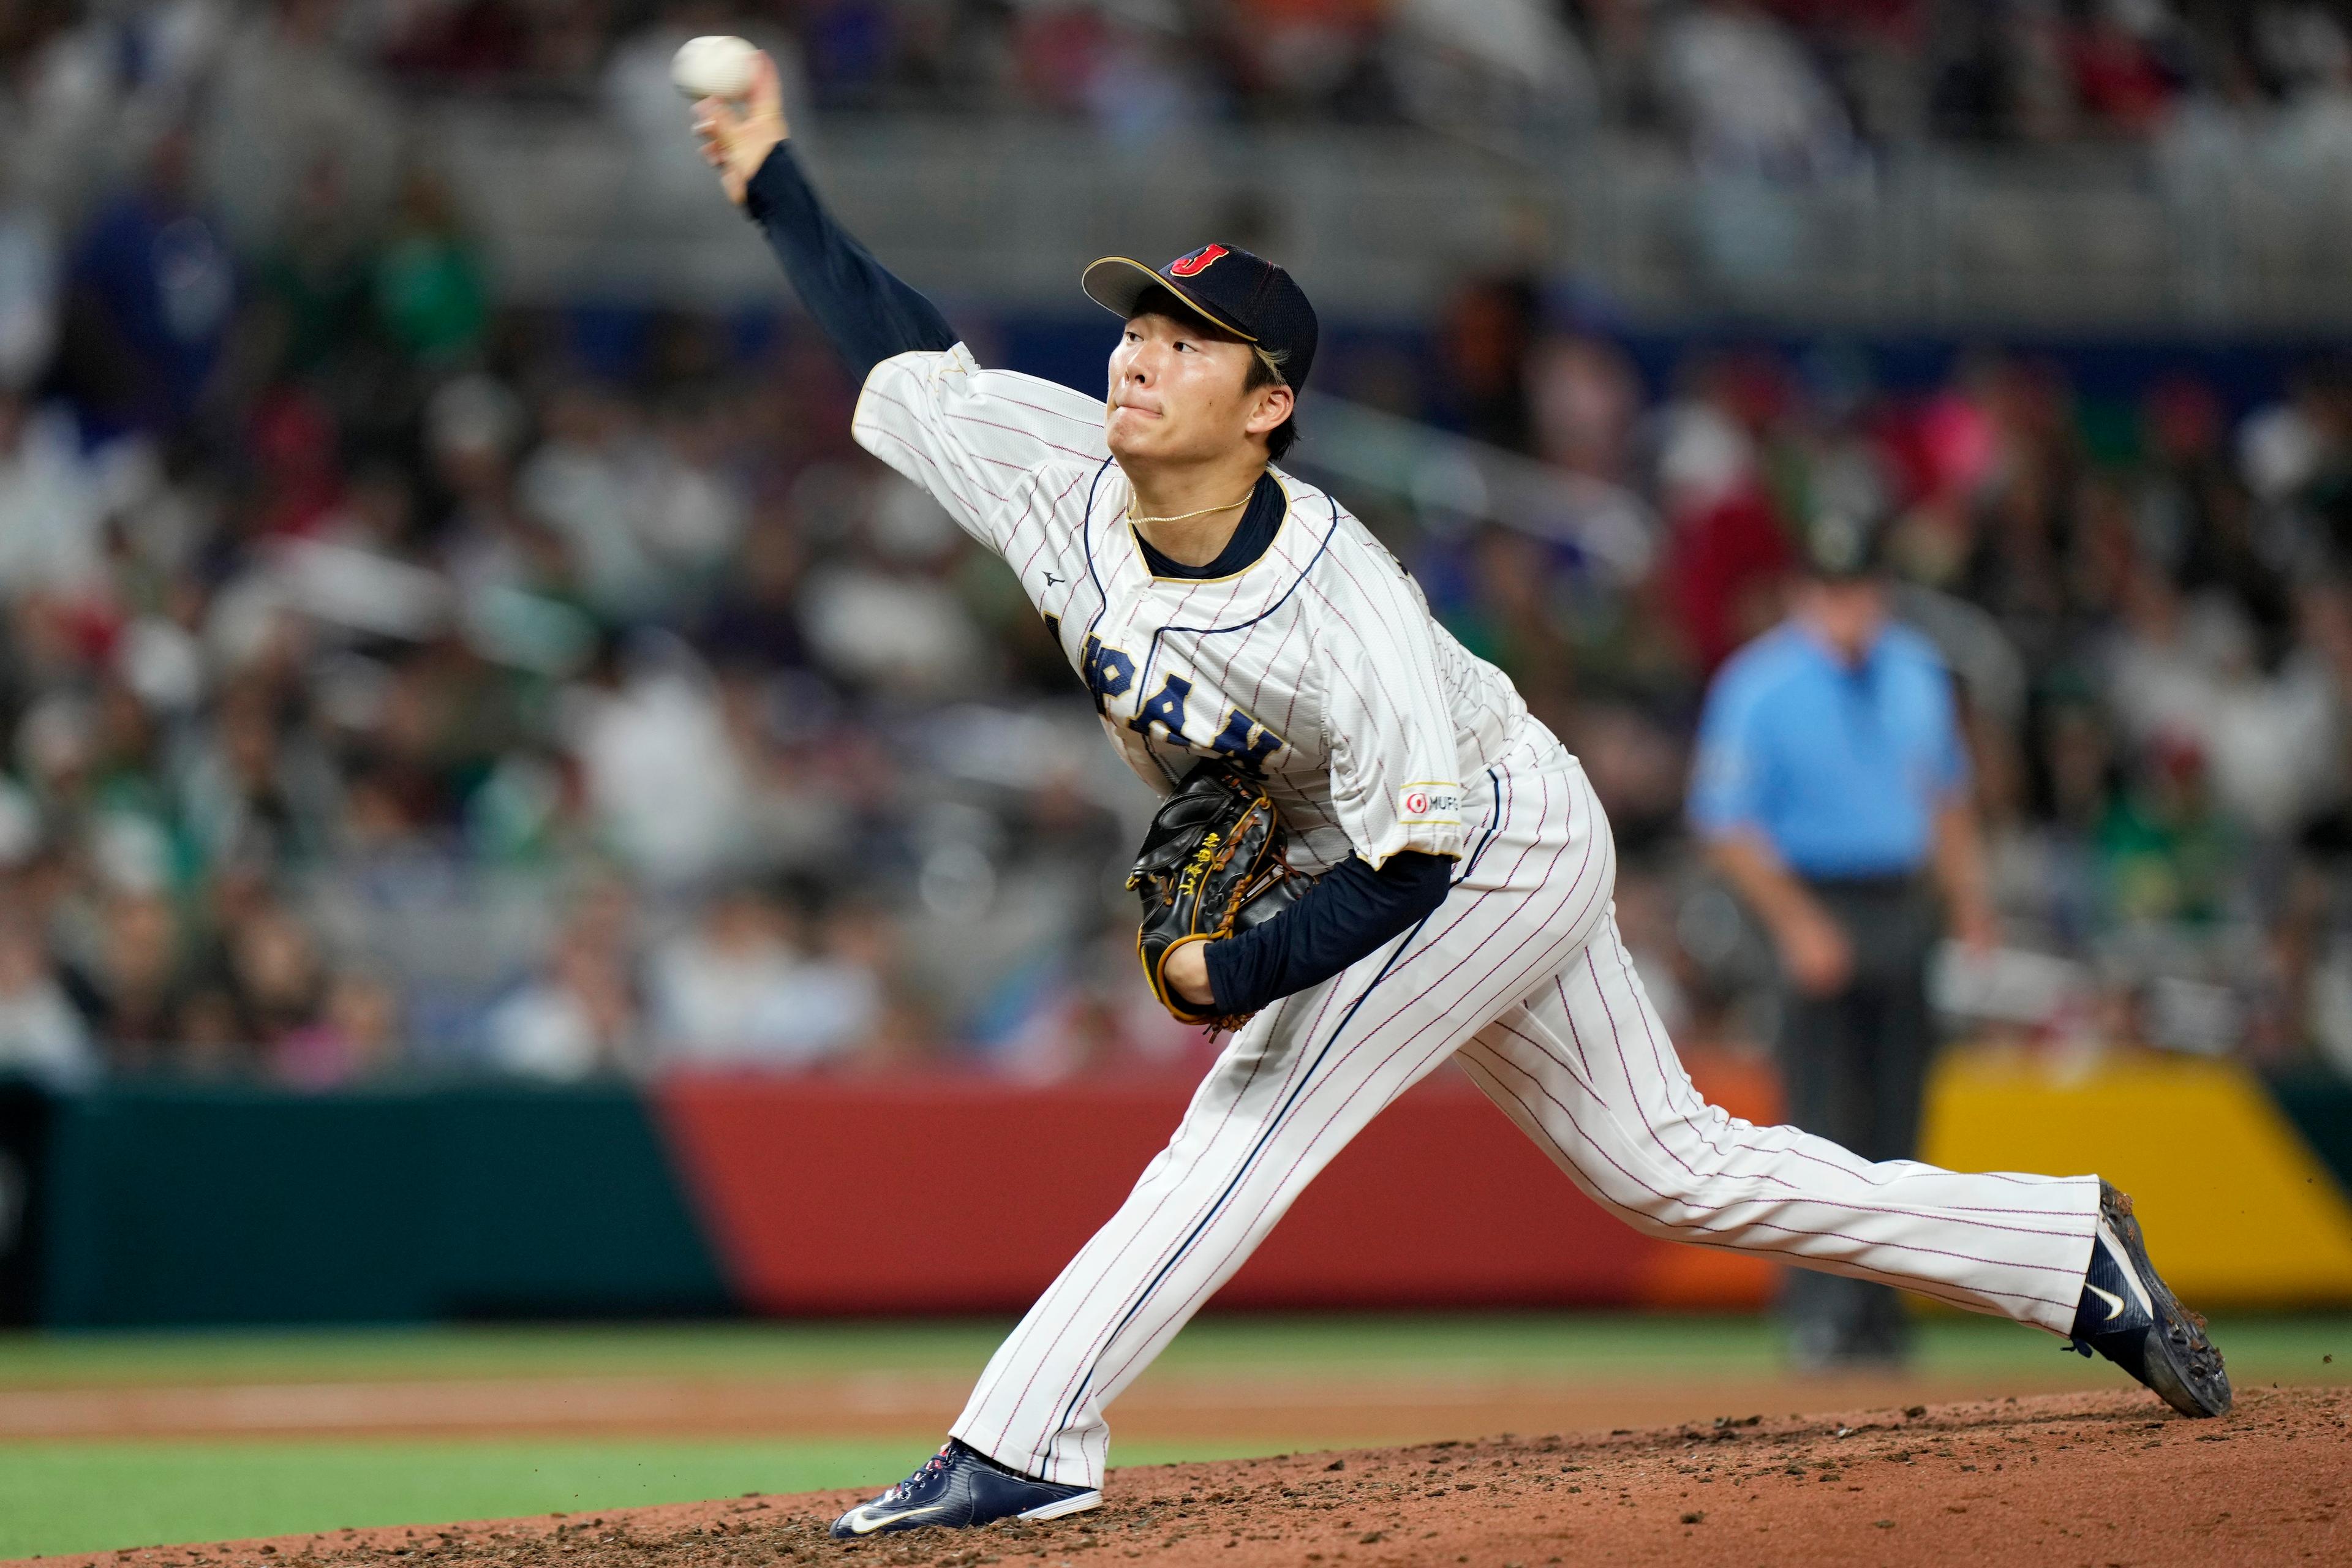 Prized Pitcher Yoshinobu Yamamoto Agrees to $325 Million Deal With Dodgers, According to Reports